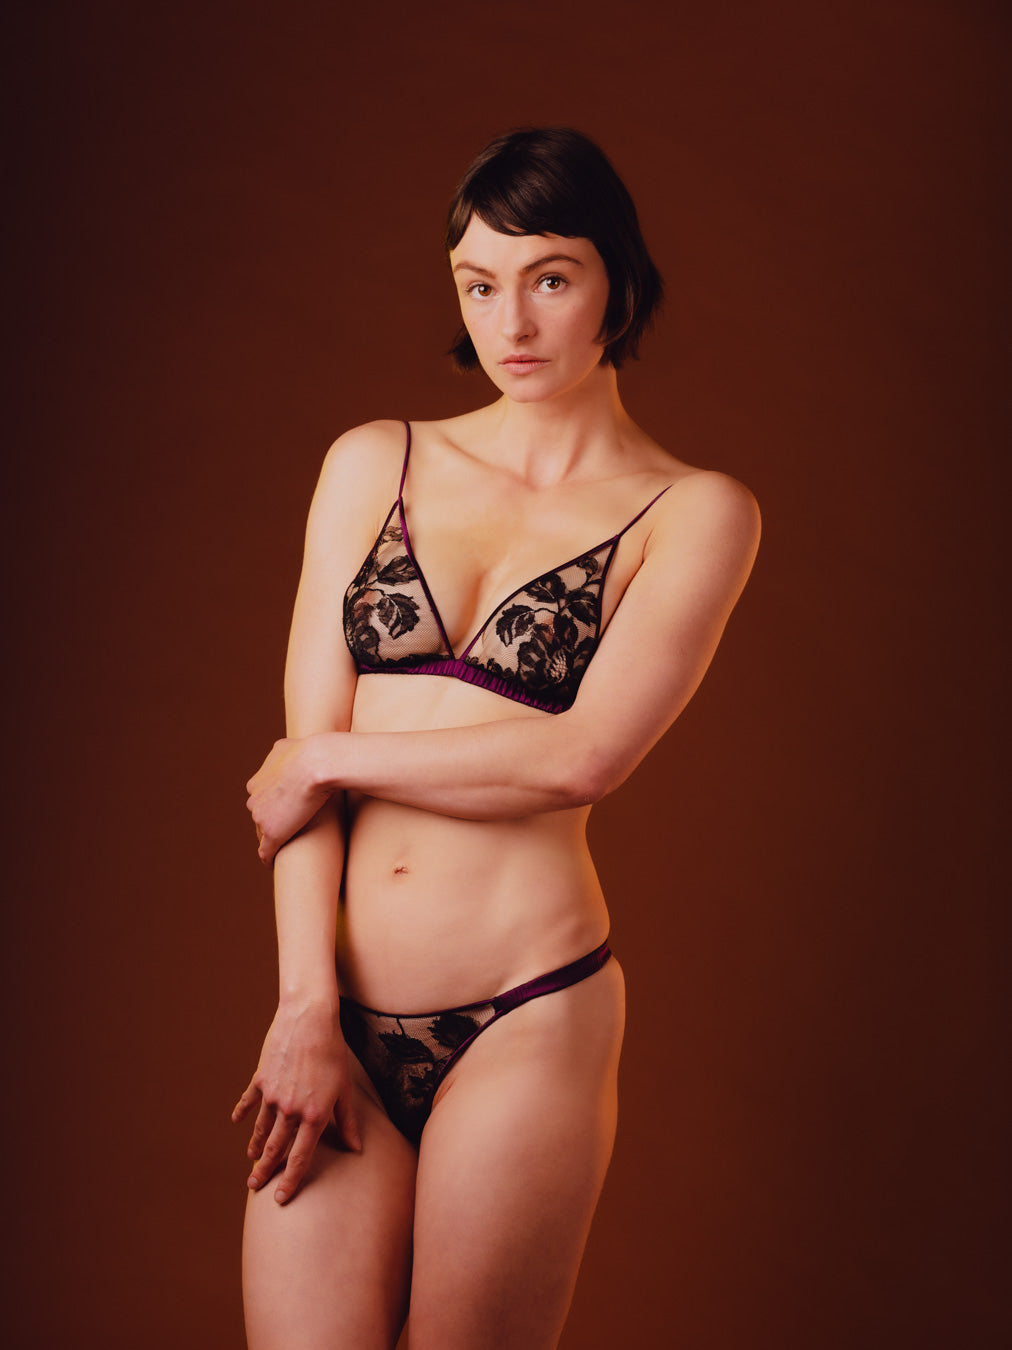 Nocturne Silk & Lace Triangle Bralet - Made To Order